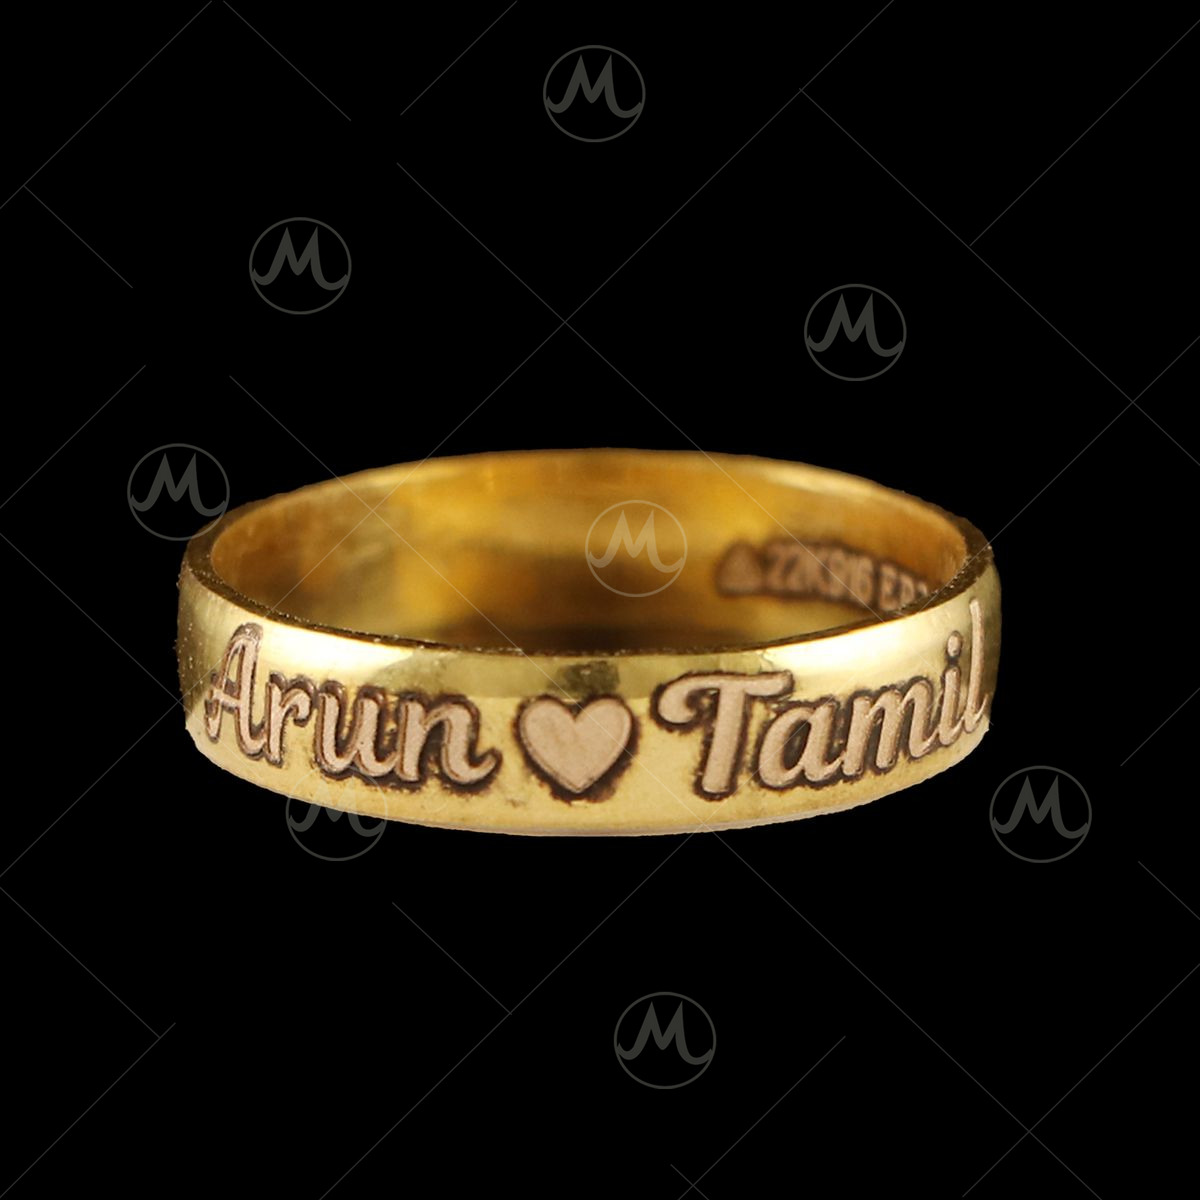 Buy Customized/Personalized Name Adjustable Brass Ring With Ur Name Or Love  One Name With 24k Gold Plating and Laser Engraved Finish at Amazon.in